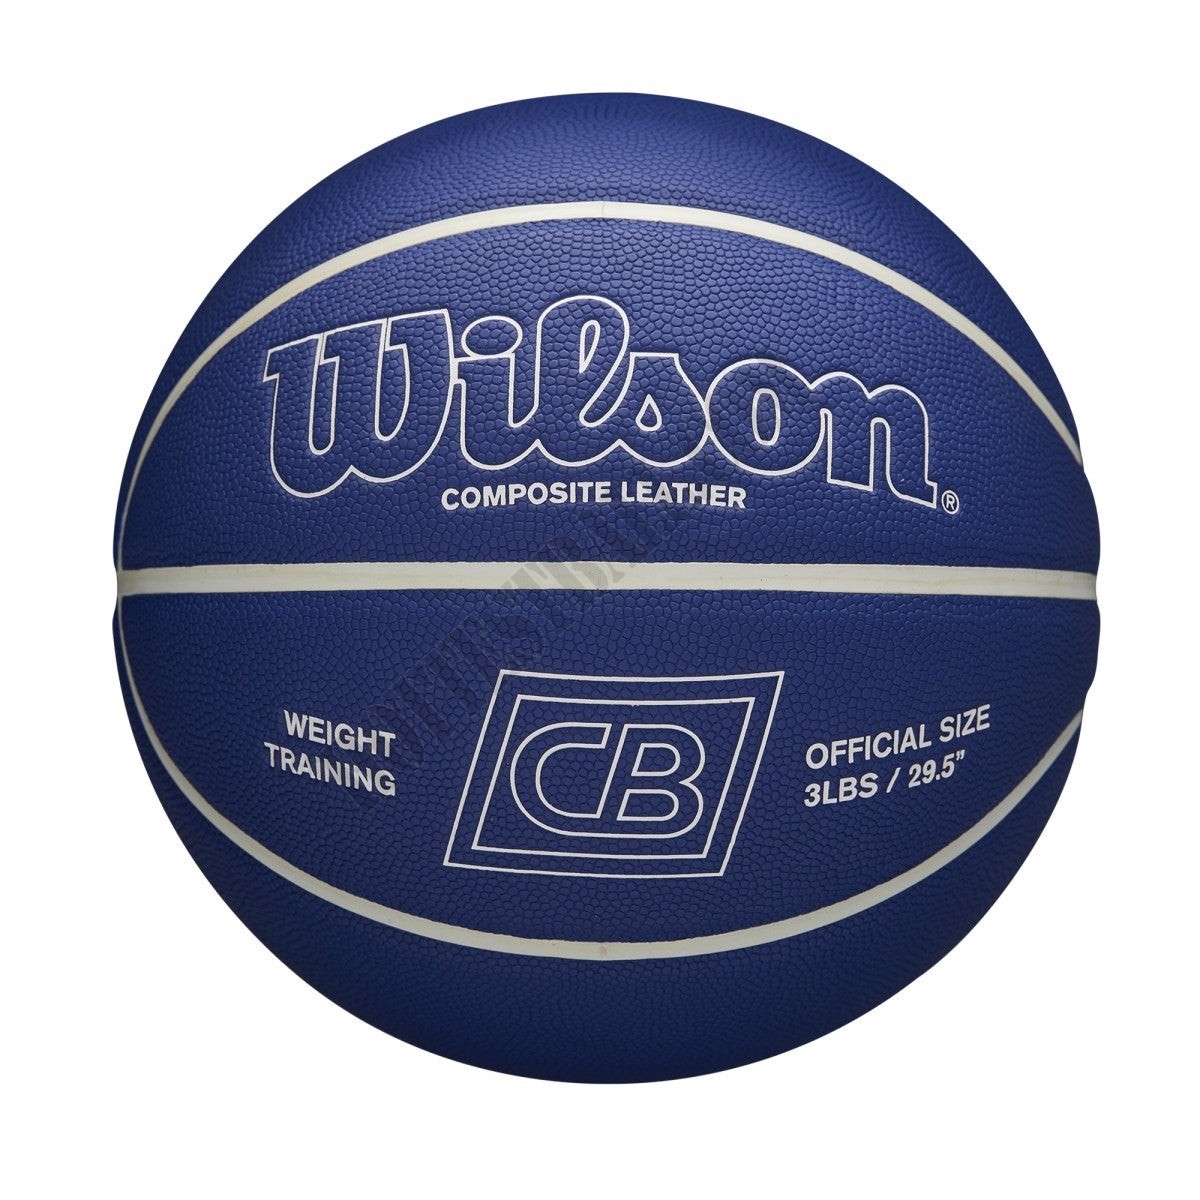 Chris Brickley Weighted Training Basketball - Wilson Discount Store - Chris Brickley Weighted Training Basketball - Wilson Discount Store